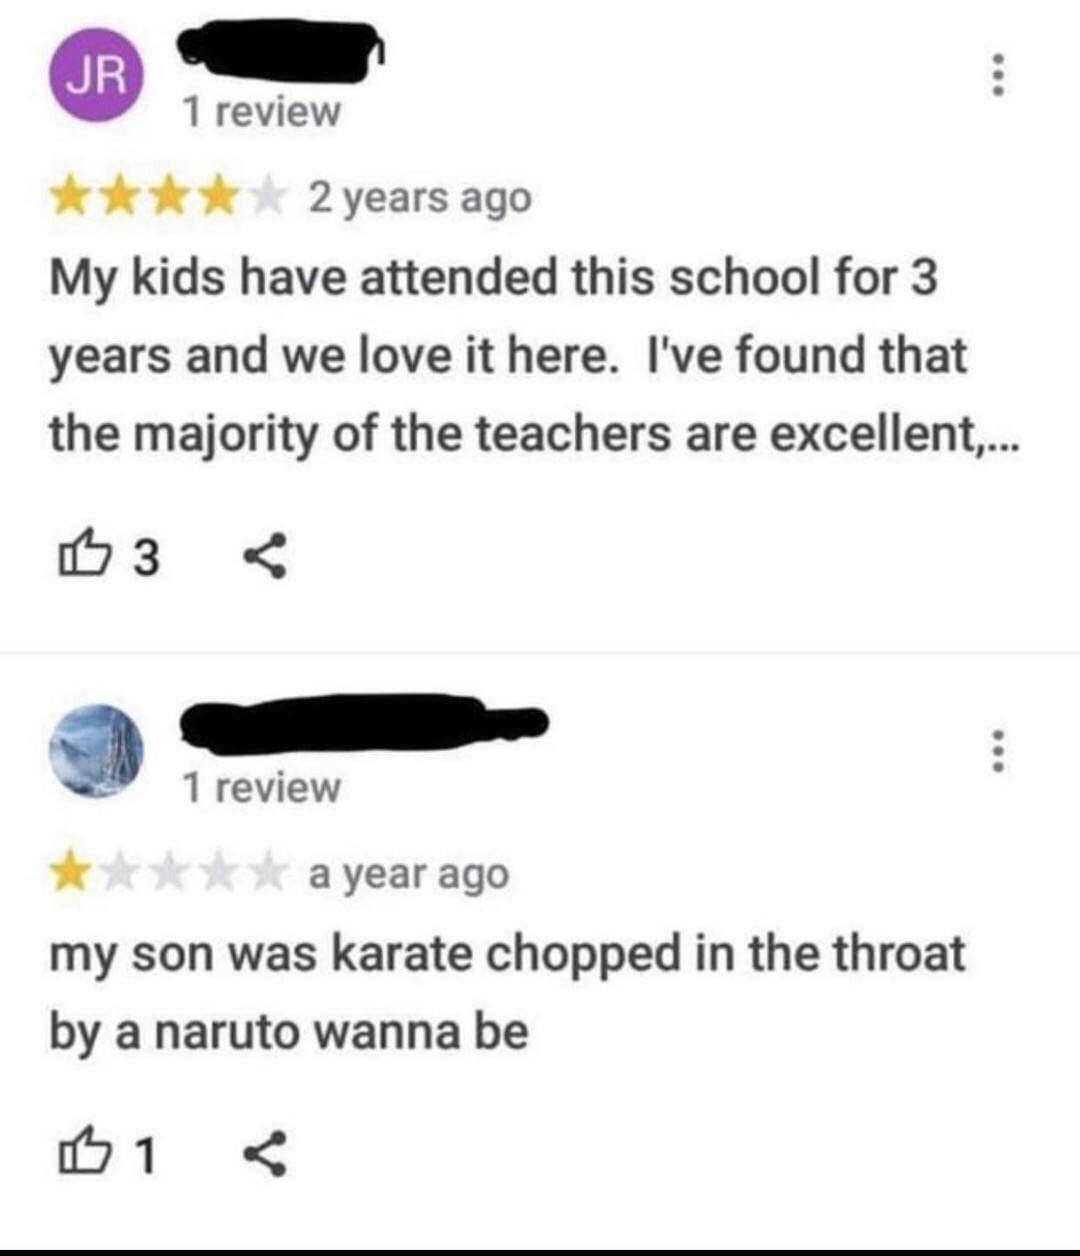 my son got karate chopped in the throat by a naruto wannabe - Jr 1 review 2 years ago My kids have attended this school for 3 years and we love it here. I've found that the majority of the teachers are excellent.... B3